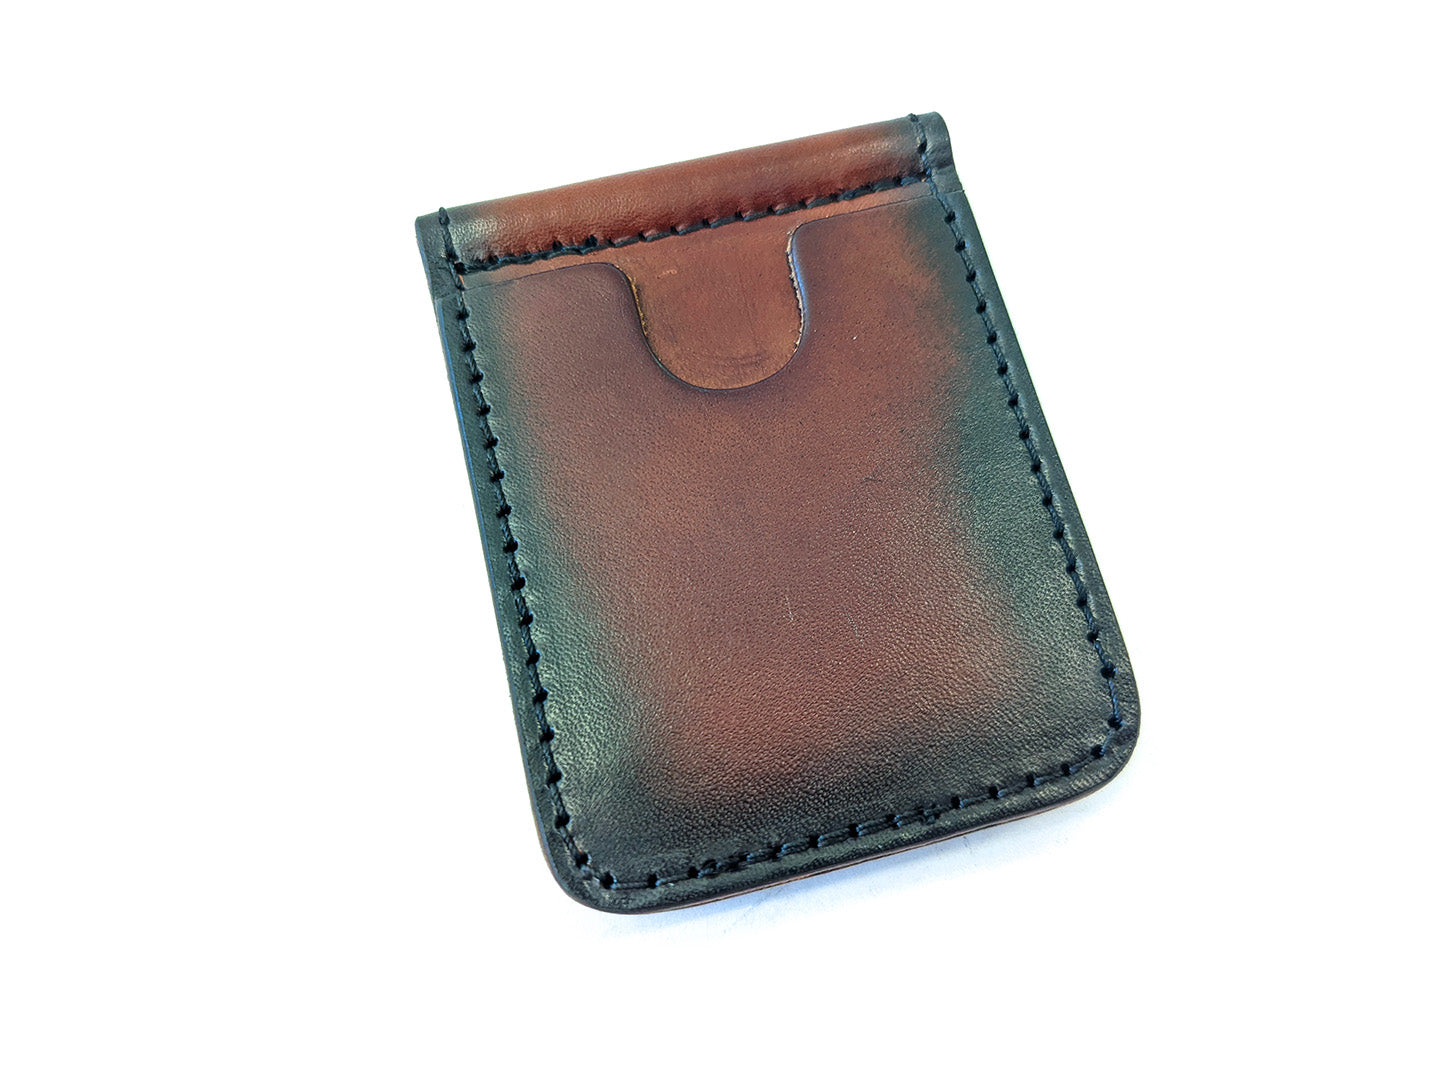 Miss Checker Leather Wallet Fashion Purse Credit ID Cards Money Holder  Money Pockets Brown 